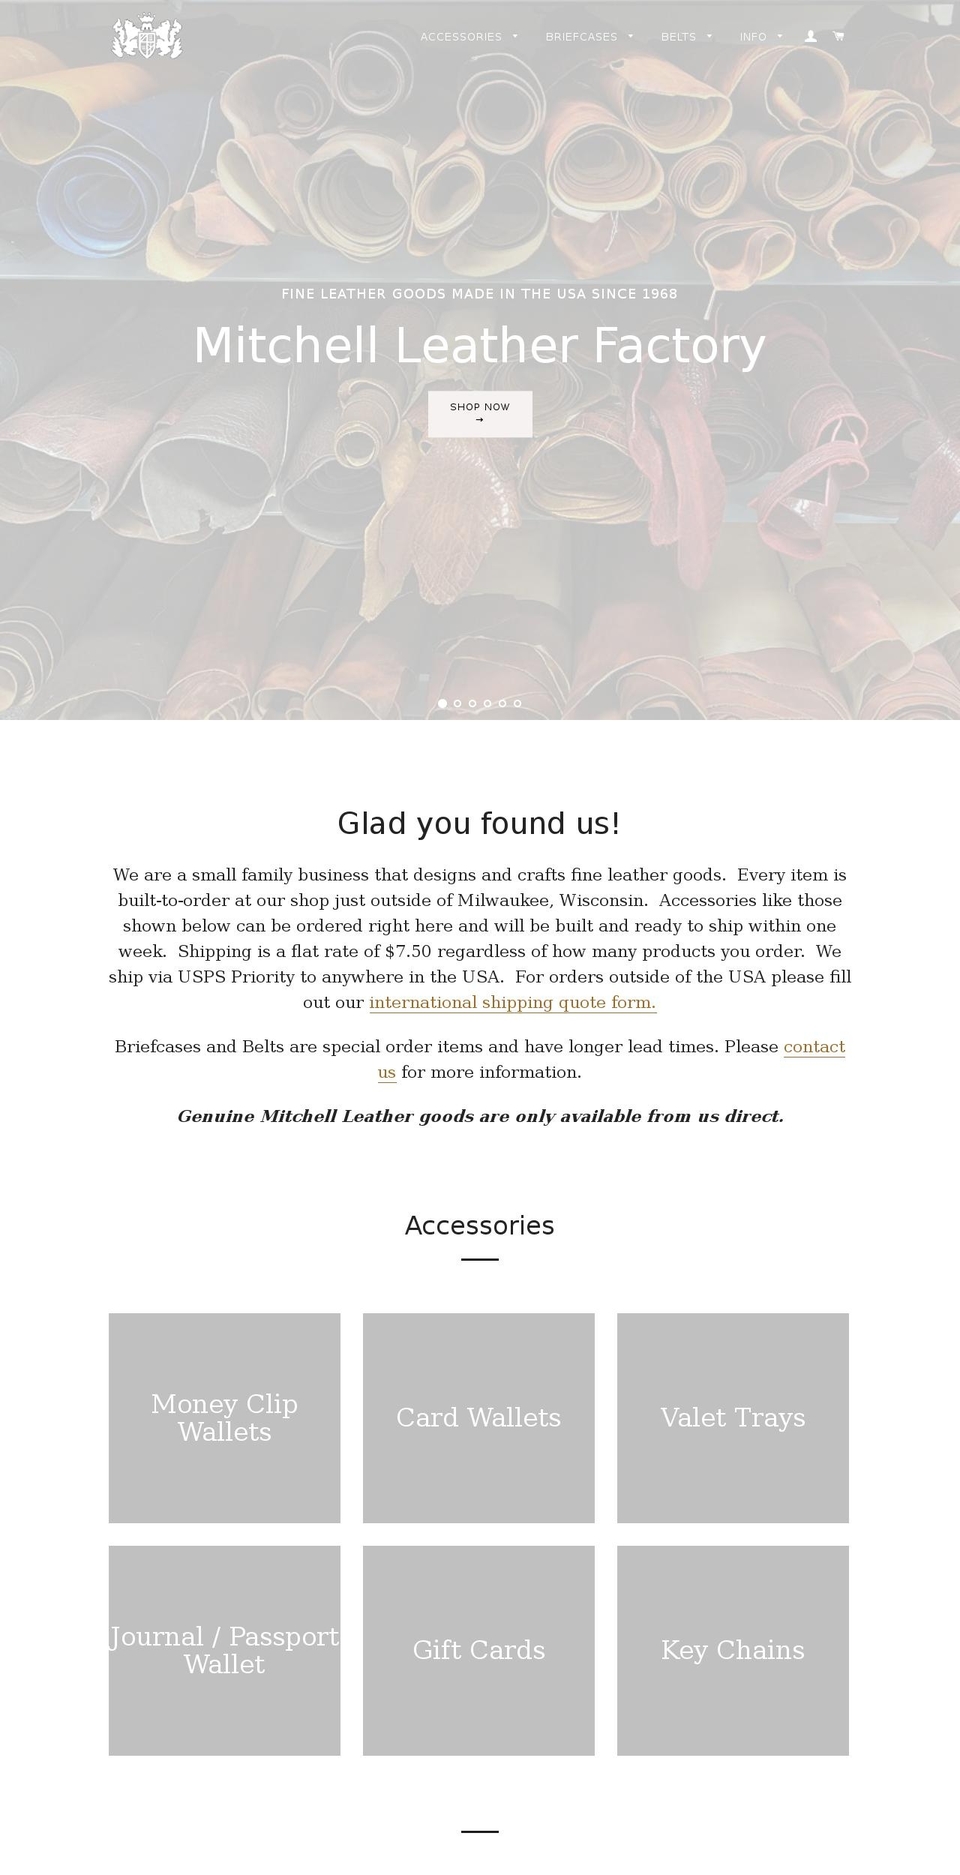 Brooklyn Shopify theme site example mitchell-leather.com